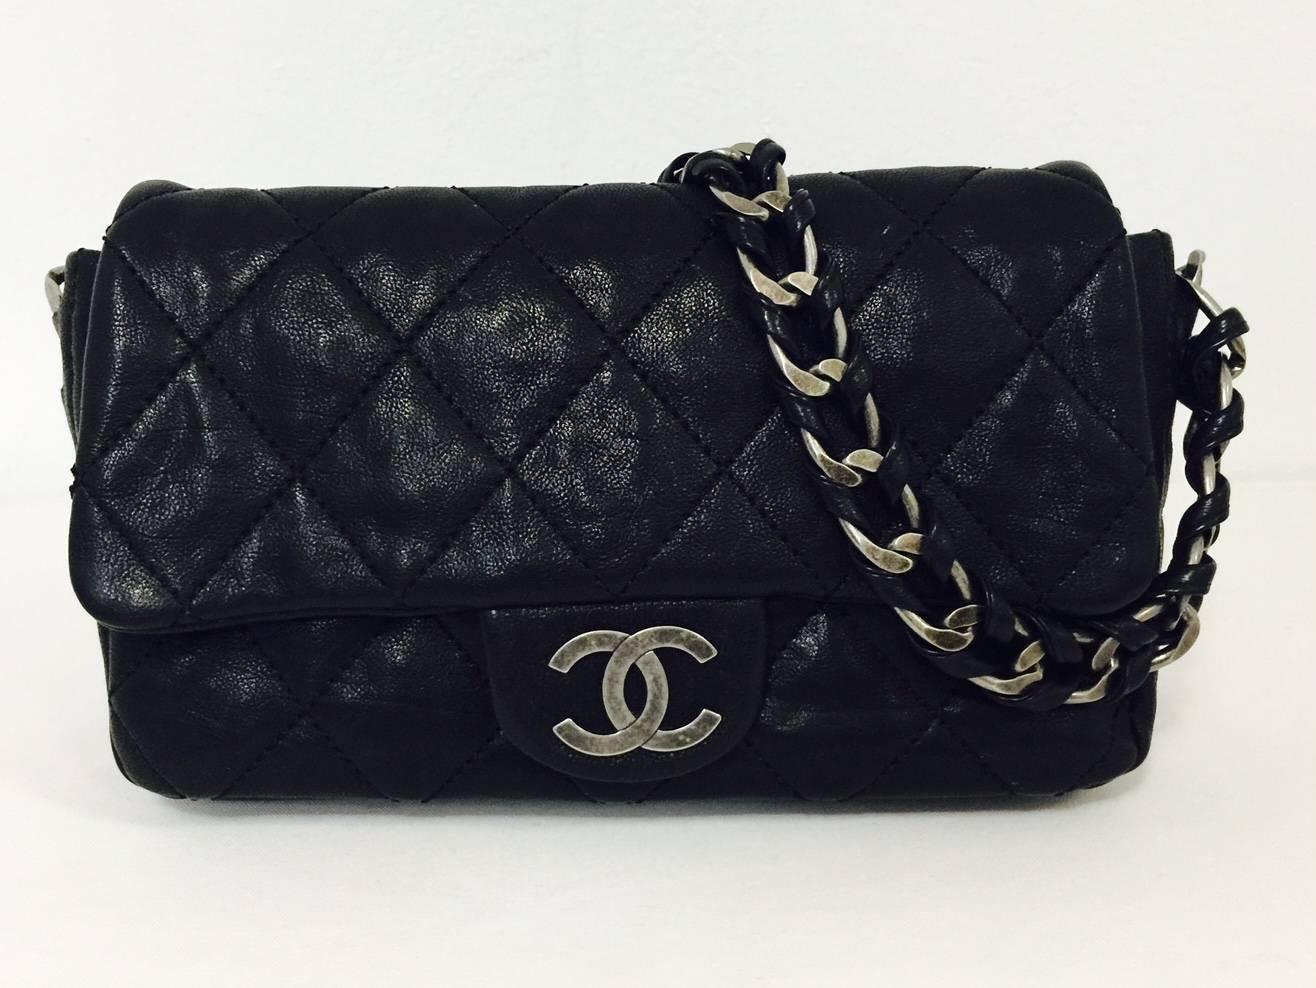 Chanel Classic Black Shoulder Bag With Rhodium Hardware is a must for any connoisseur of all things 